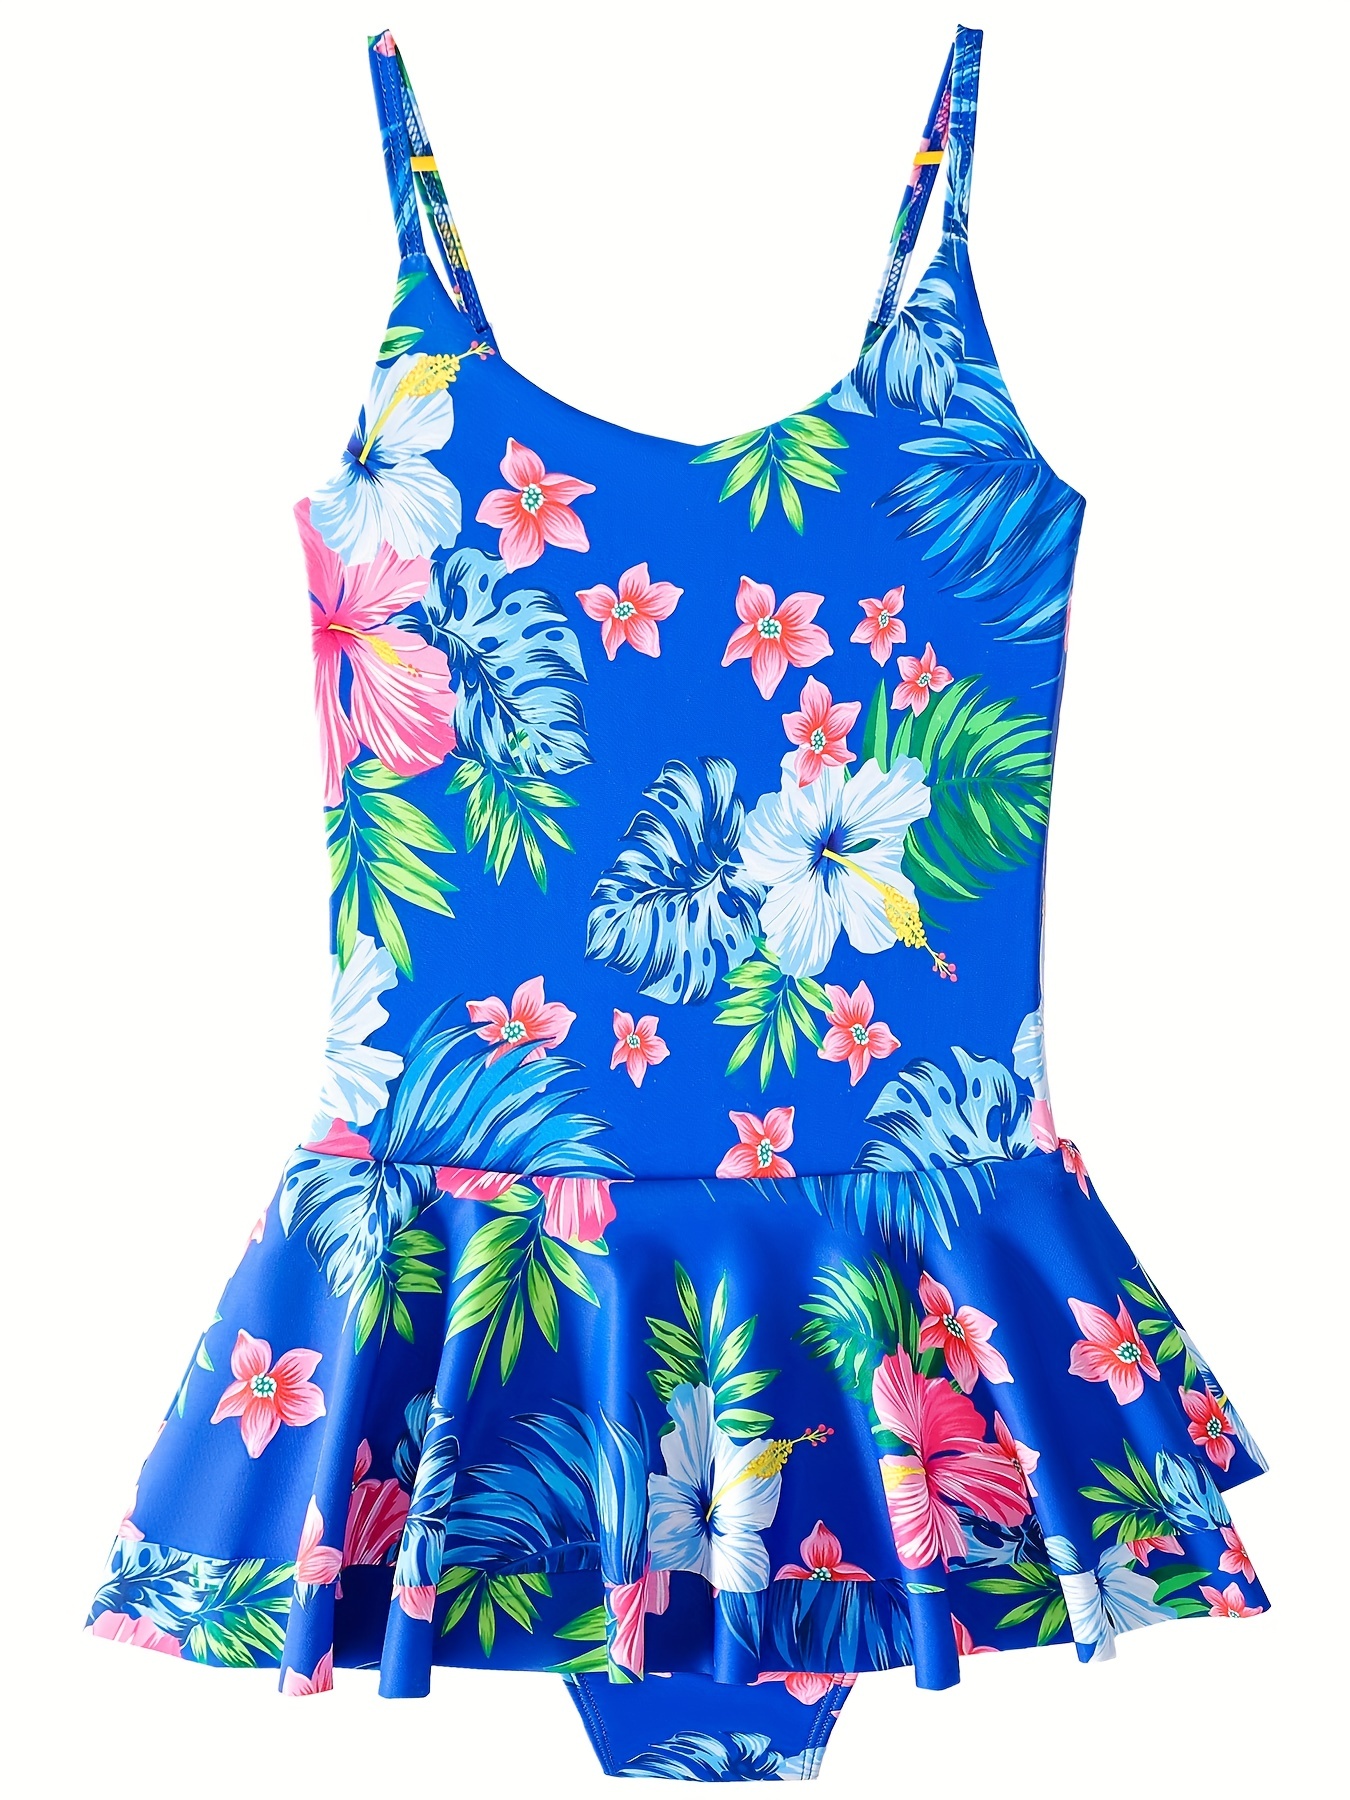 girls plum and white floral swimsuit